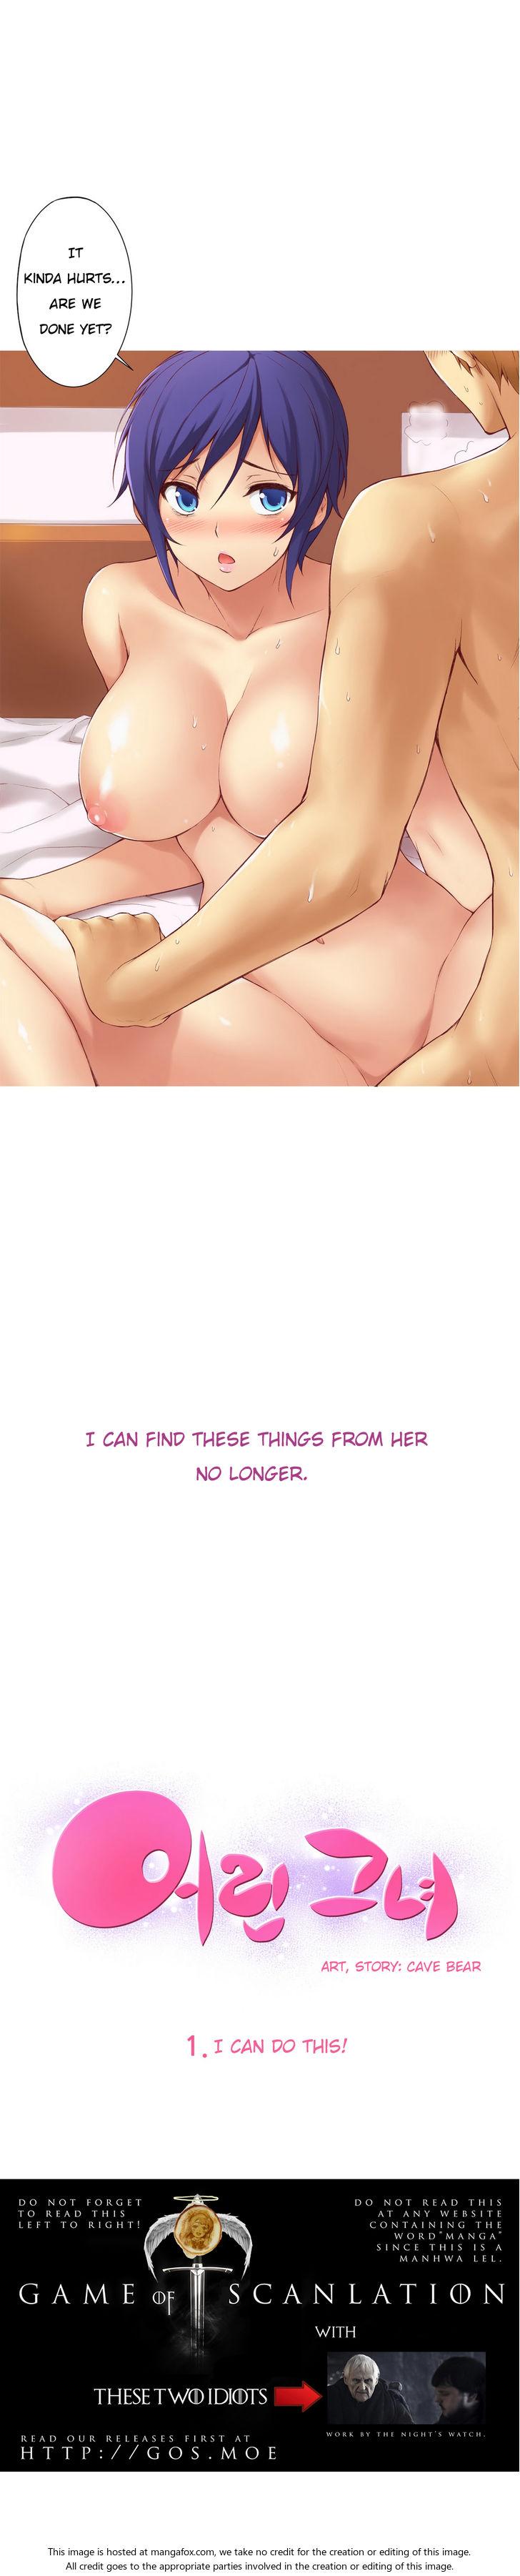 Office [Donggul Gom] She is Young (English) Part 1/2 Porn - Page 6